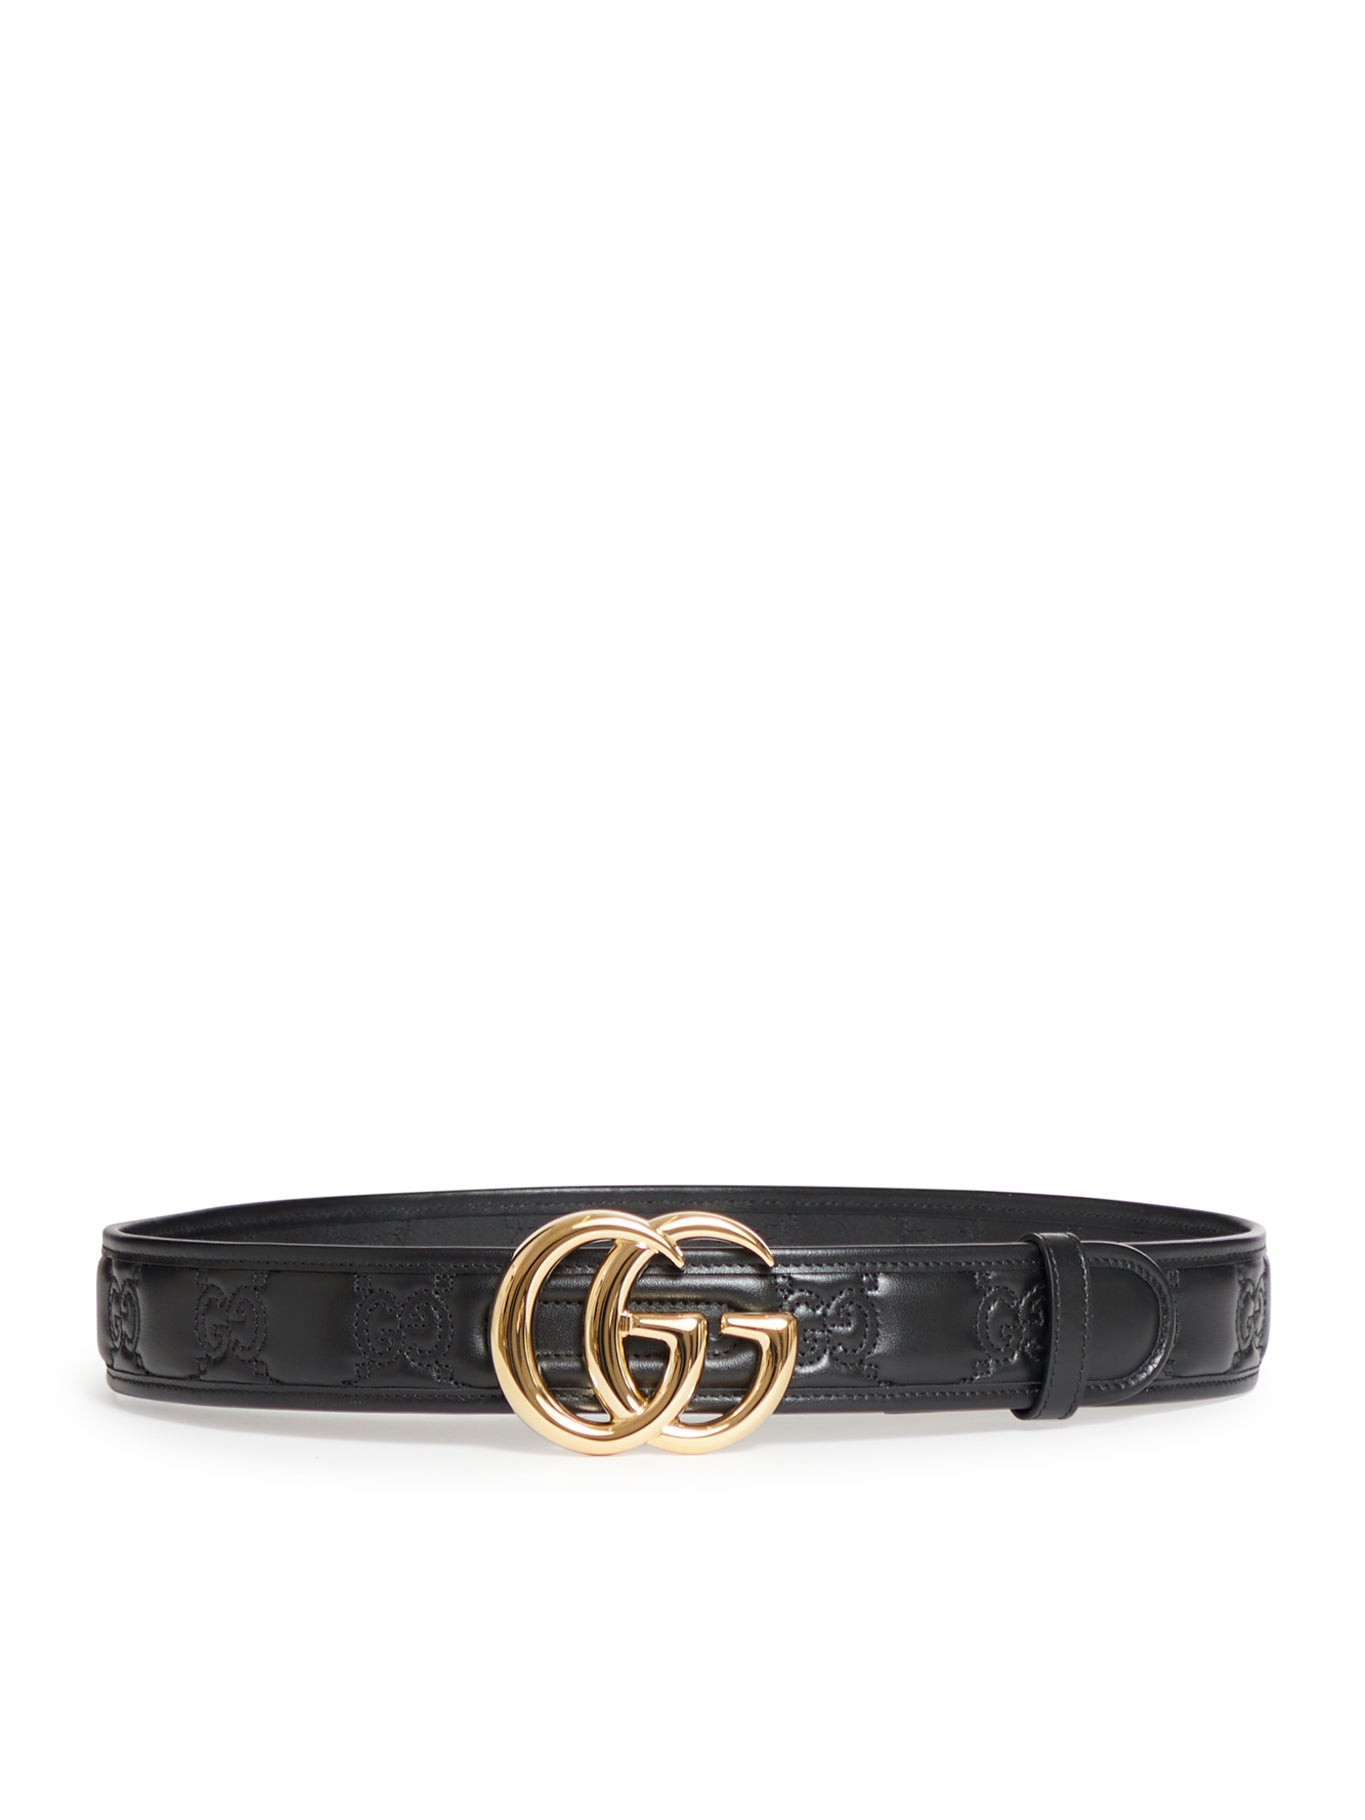 LEATHER BELT GG MARMONT